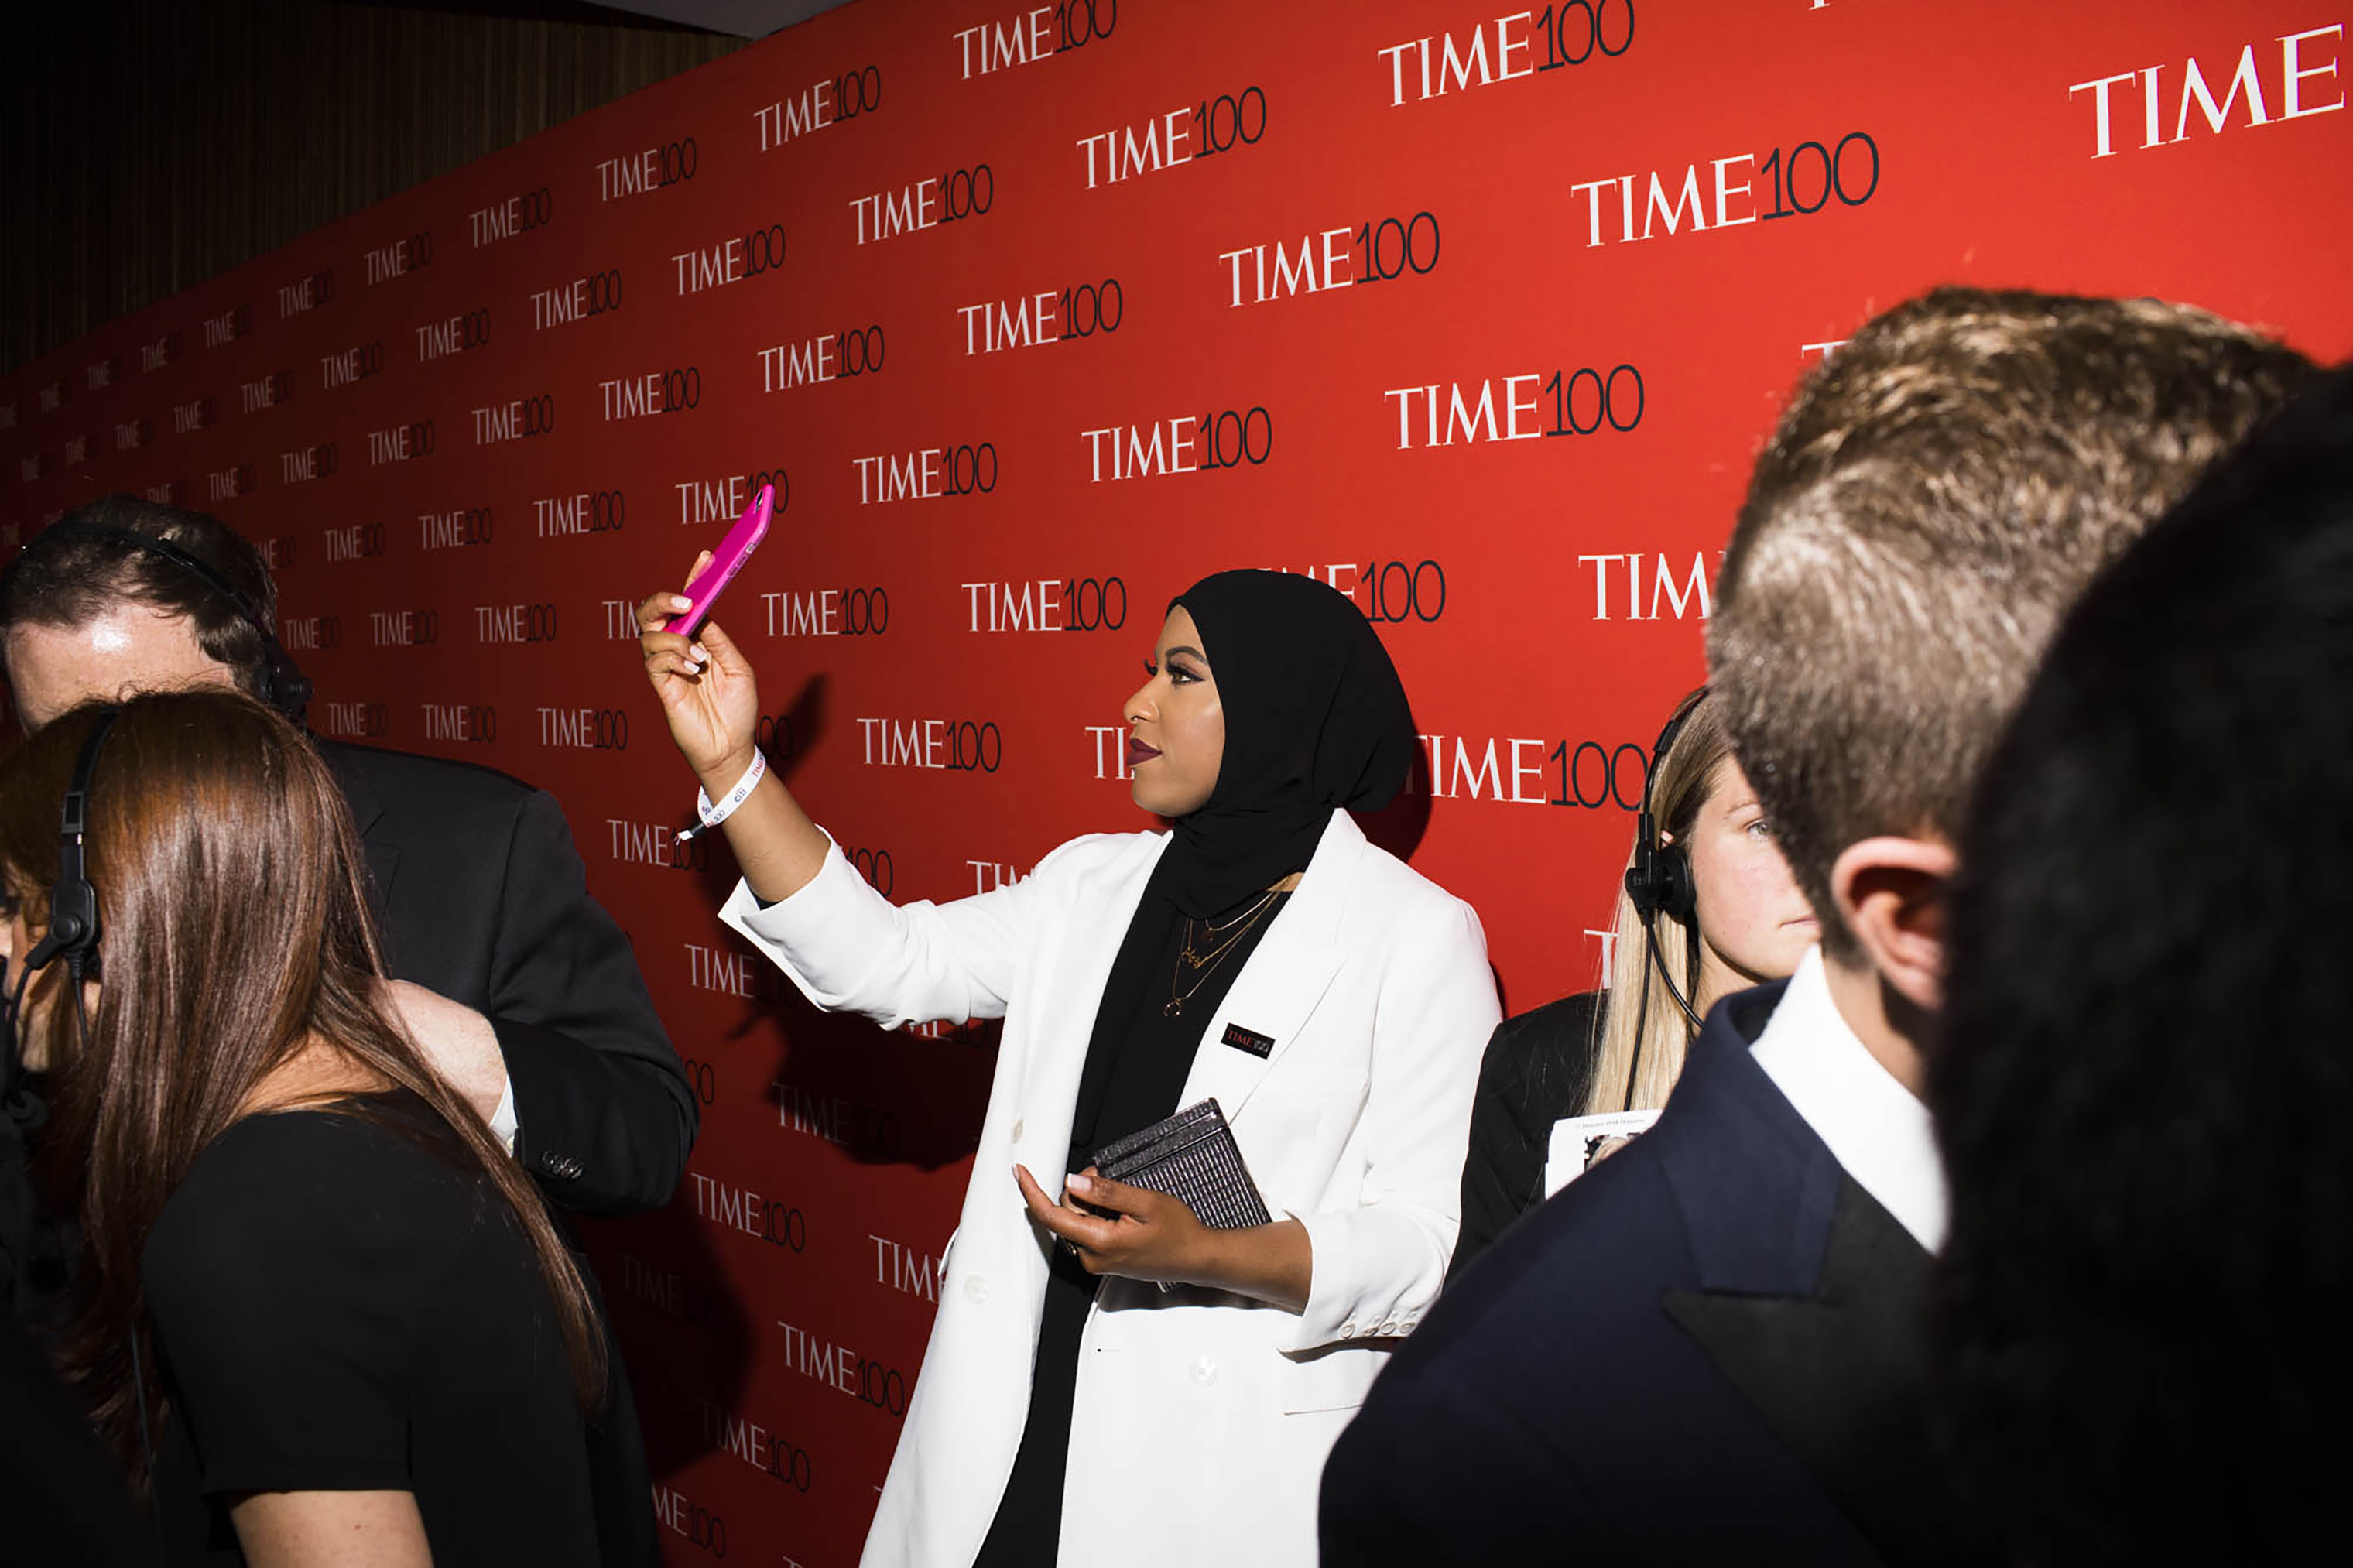 U.S. Olympic fencer Ibtihaj Muhammad at the Time 100 Gala at Jazz at Lincoln Center on April 24, 2018 in New York City. (Landon Nordeman for TIME)